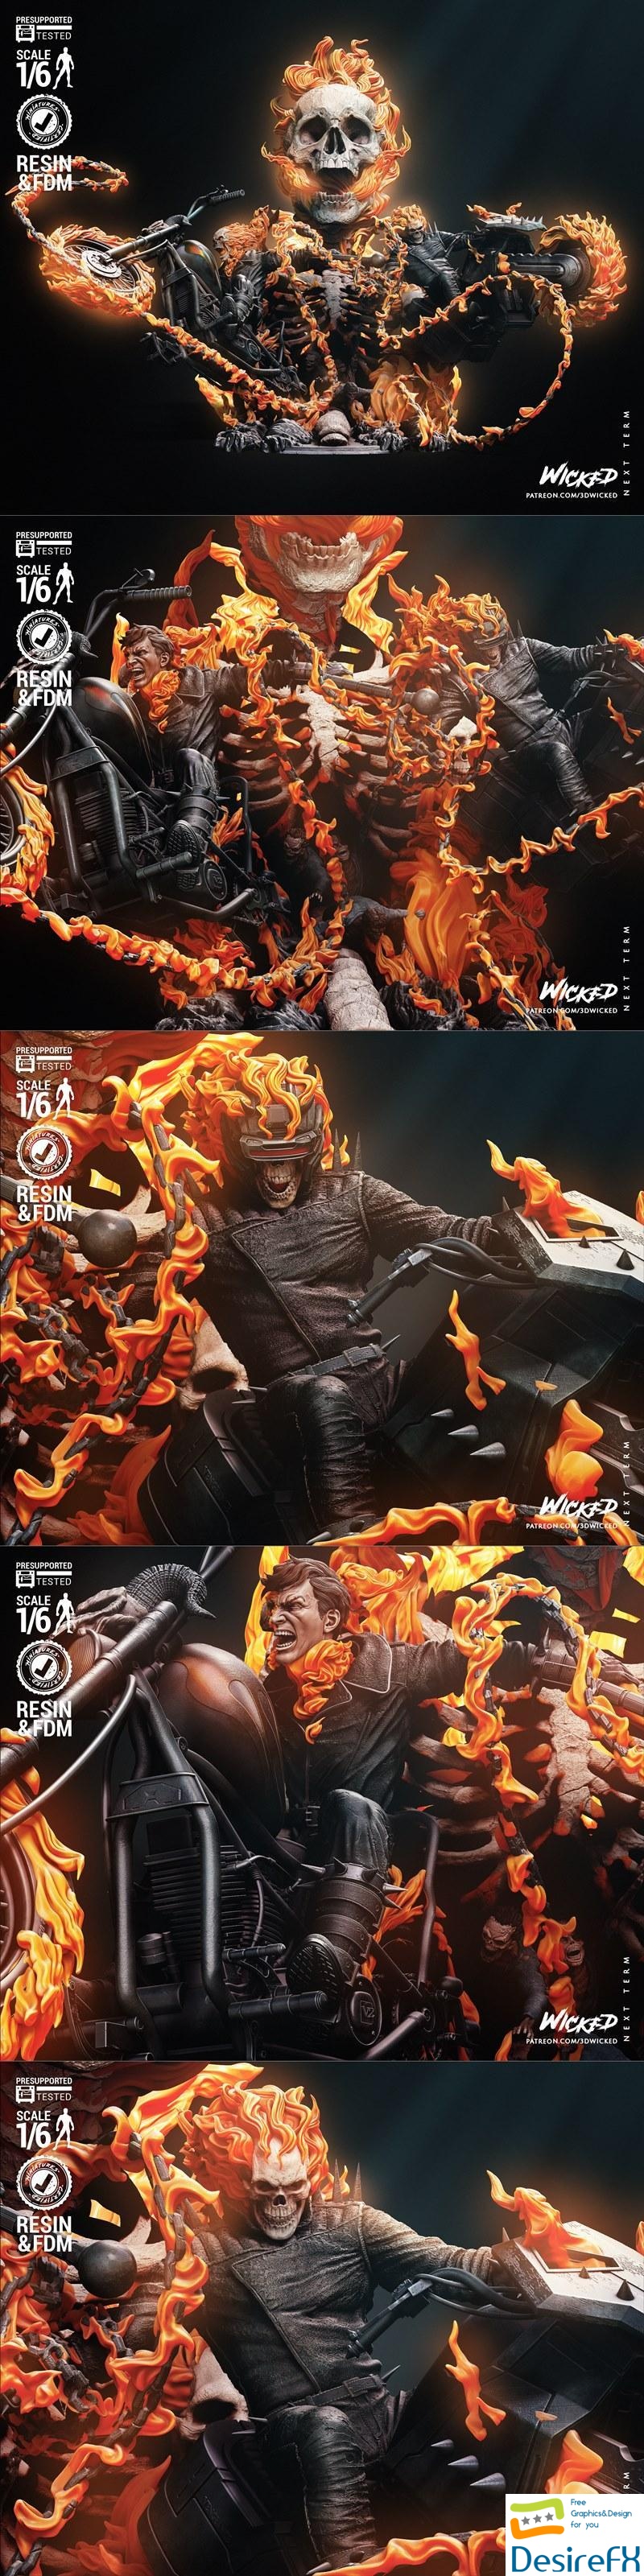 Wicked - Ghost Riders Diorama 3D Print